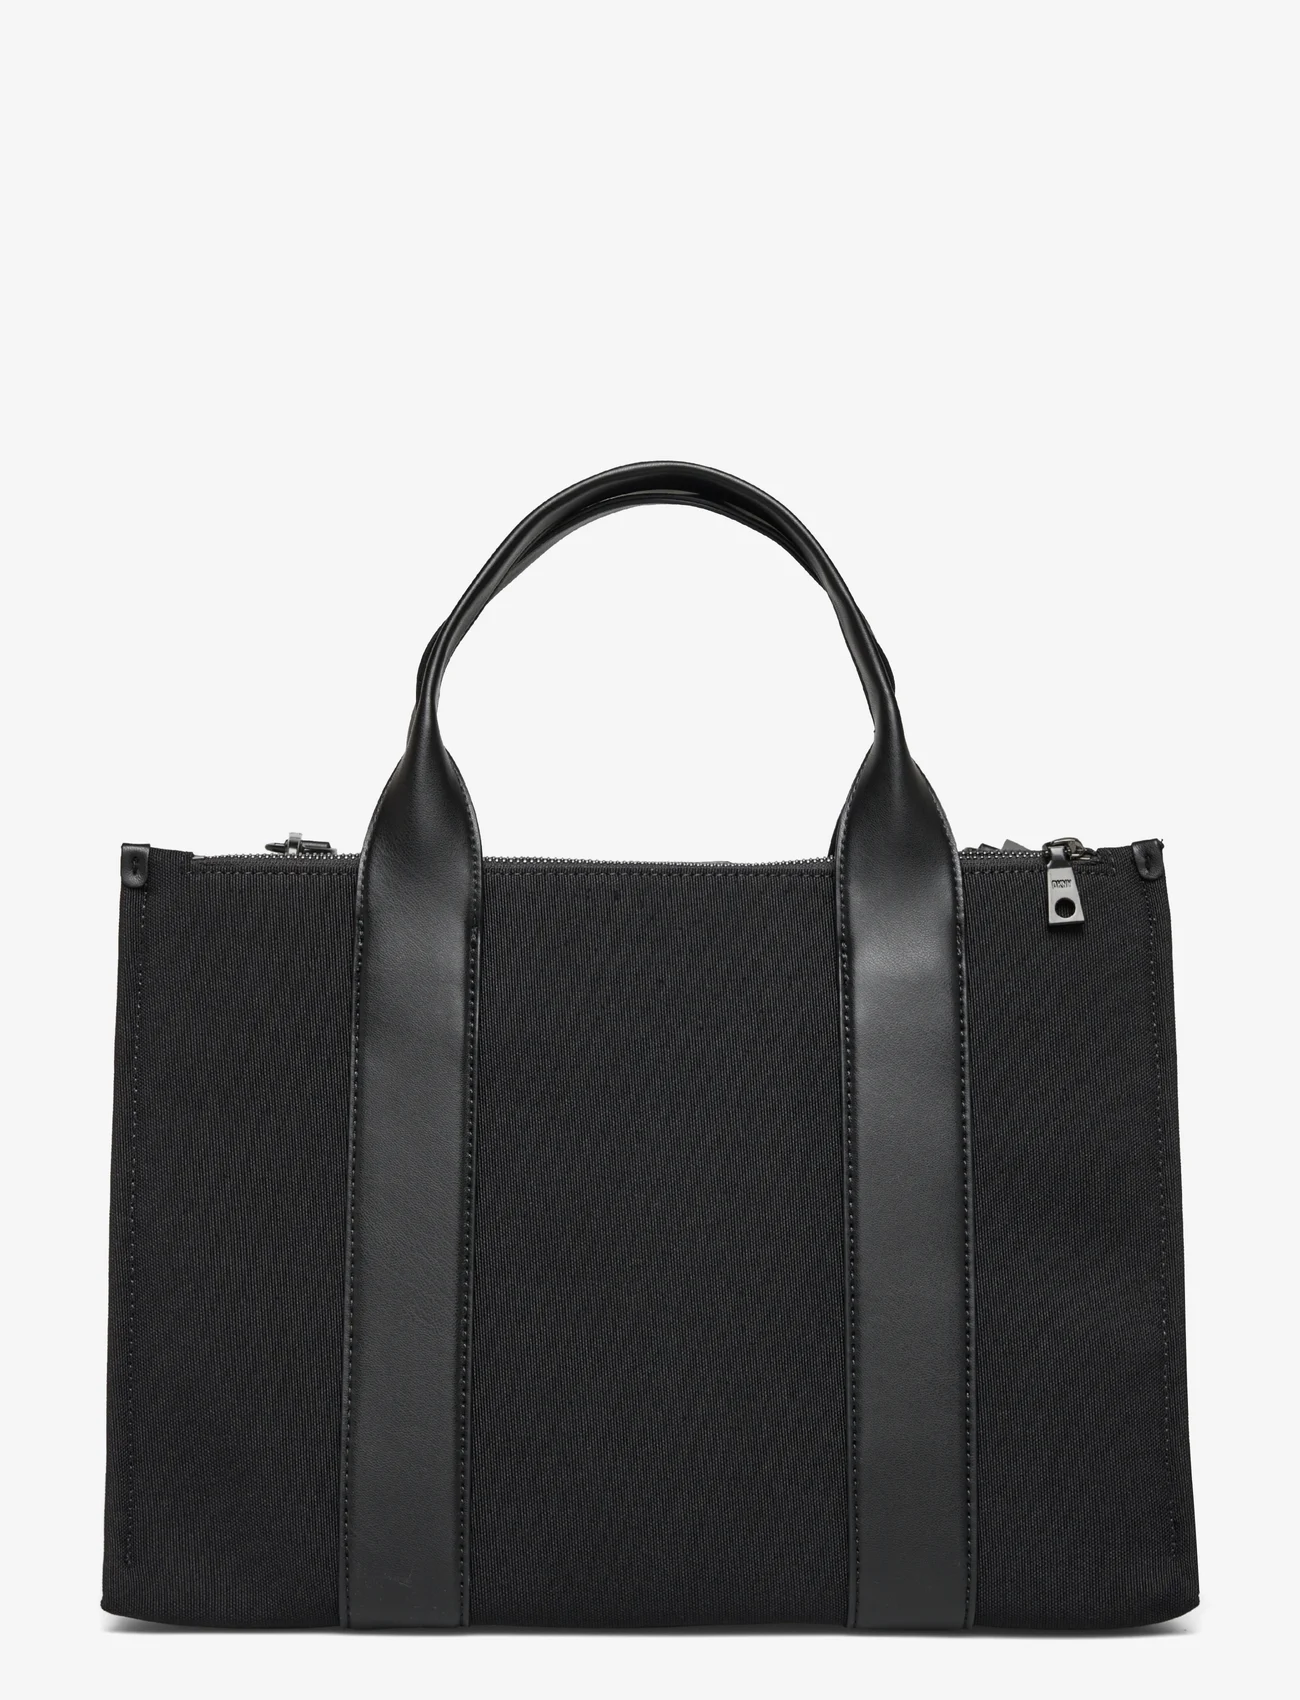 DKNY Bags - HOLLY MD TOTE - tote bags - bbl - blk/black - 1